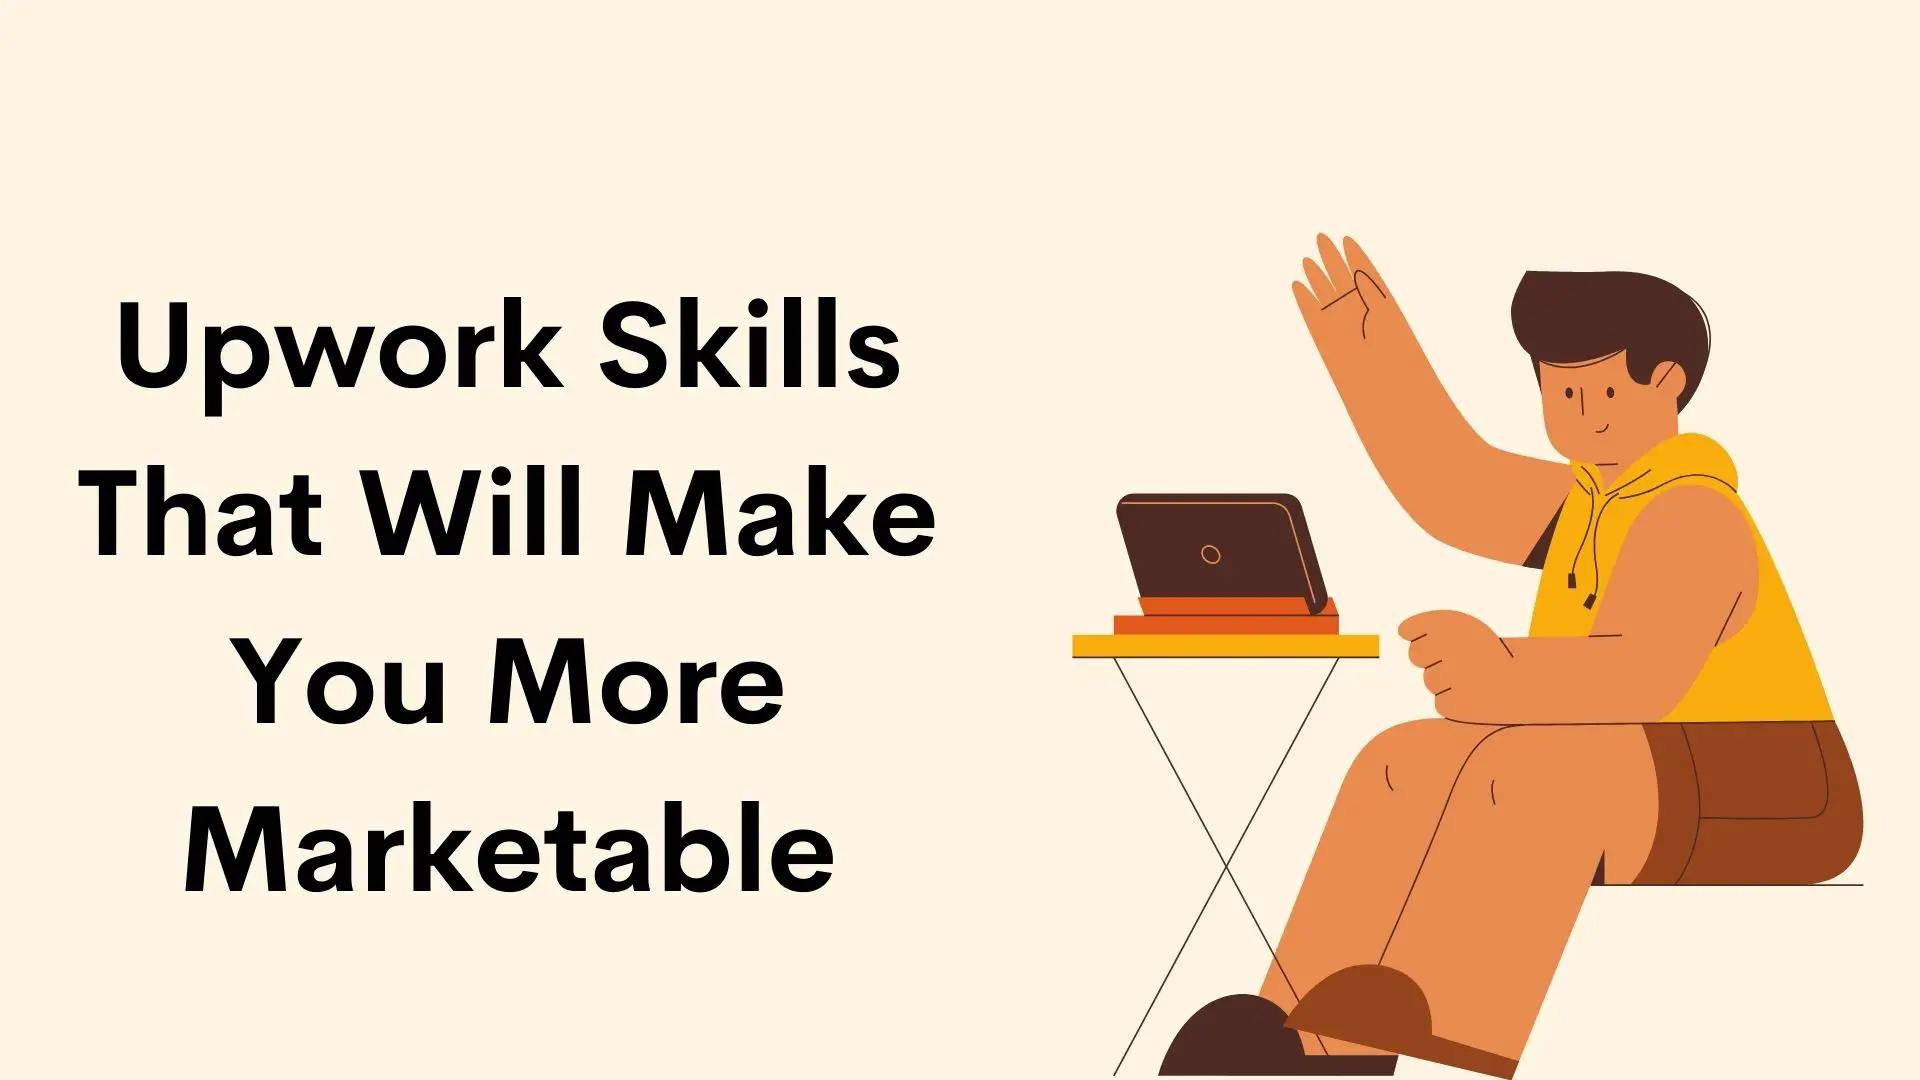 Upwork Skills That Will Make You More Marketable